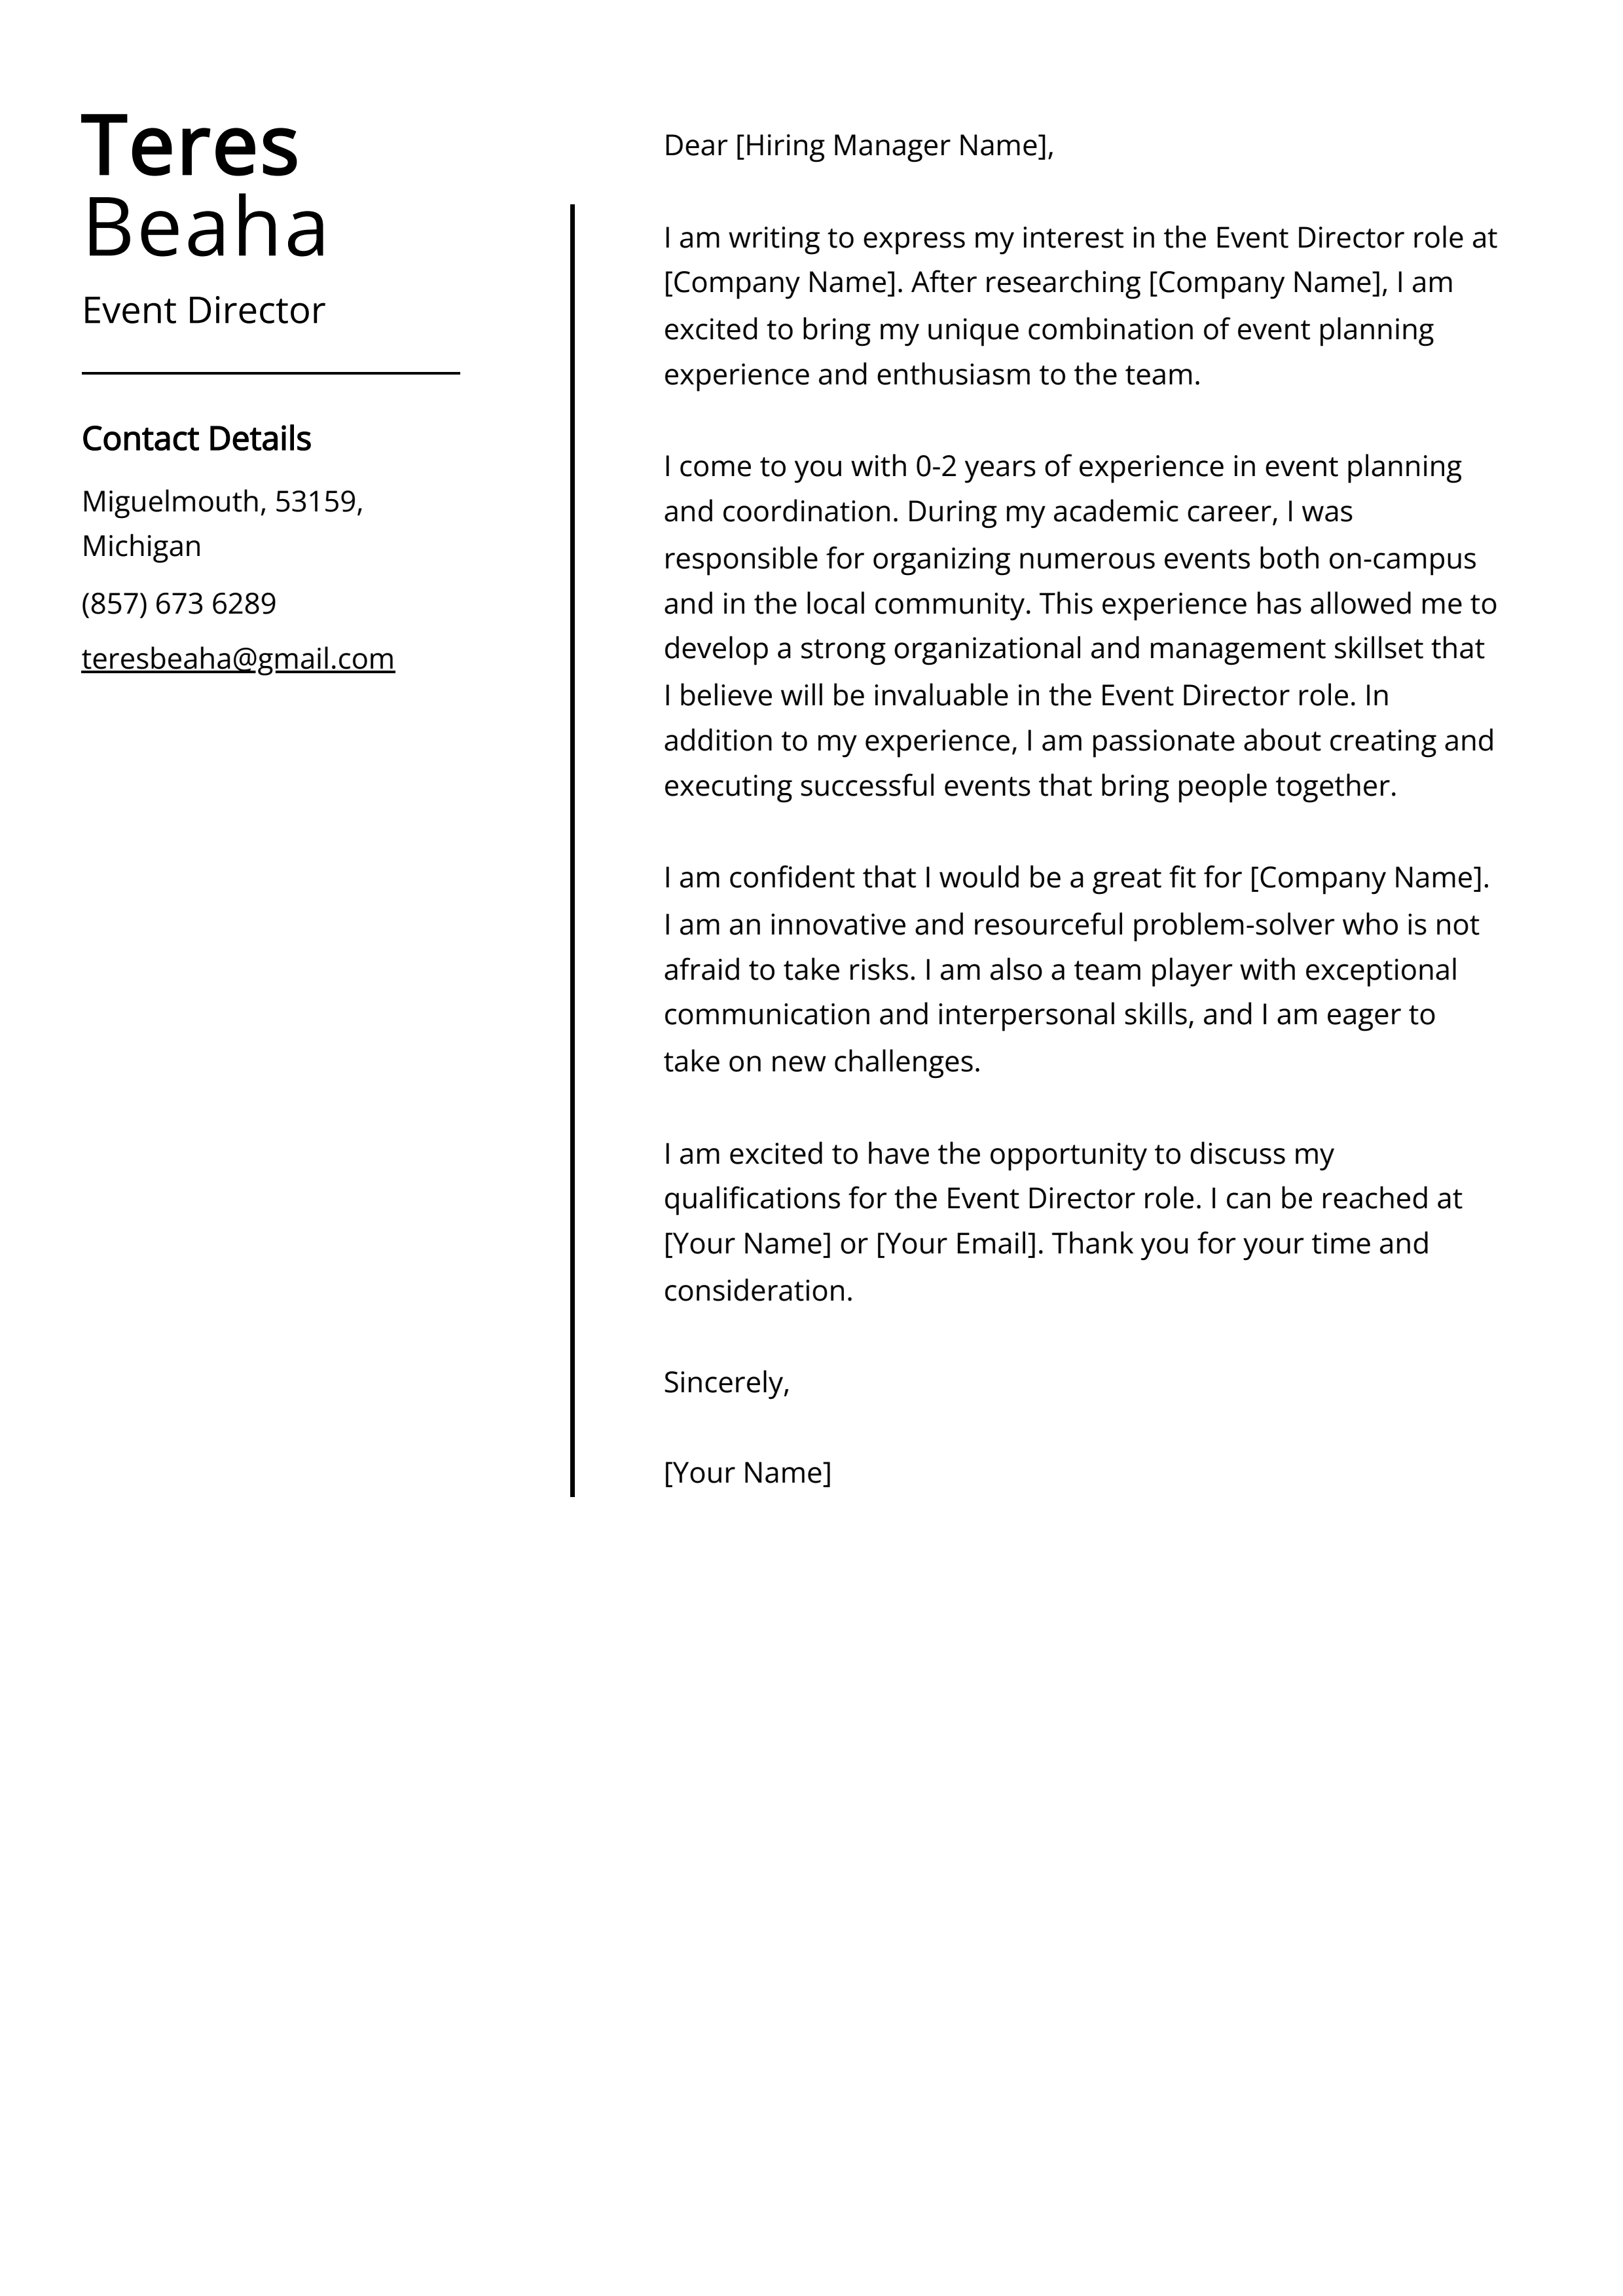 Event Director Cover Letter Example